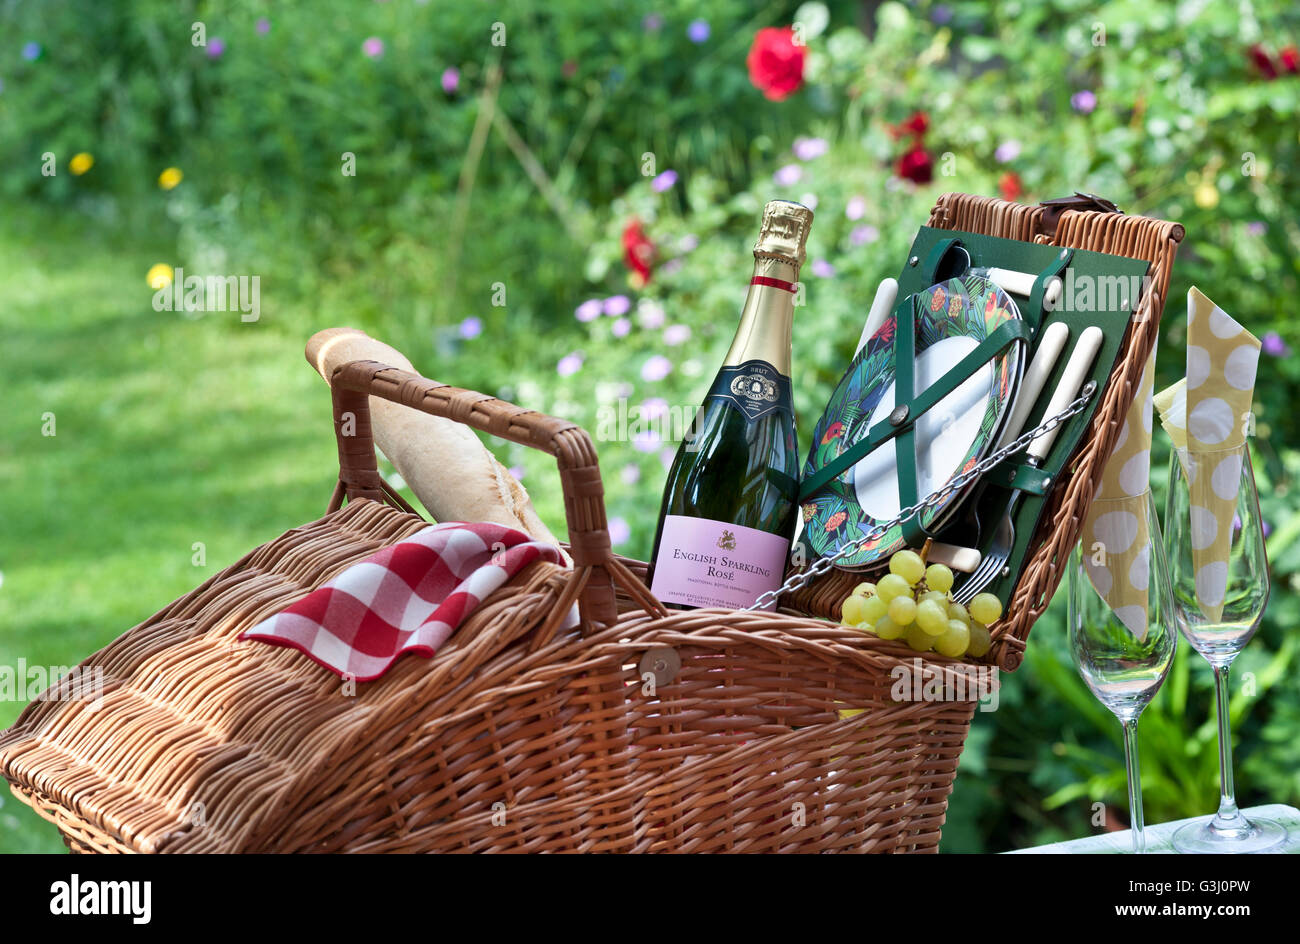 English sparkling Rose wine bottle and wicker picnic basket in sunny floral garden situation Stock Photo